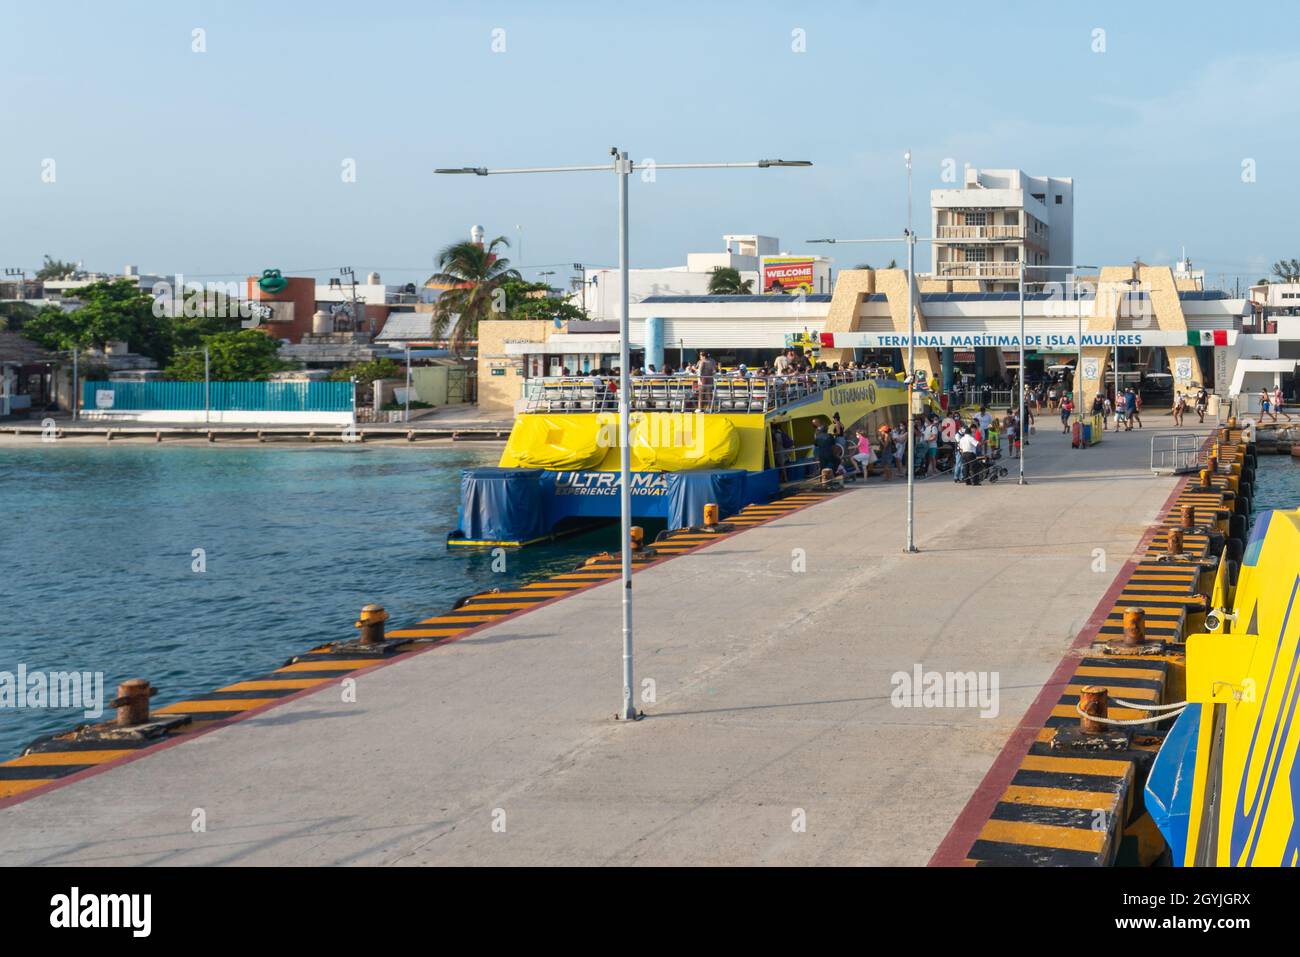 Isla Mujeres, Mexico September 13, 2021 View of ferry port with the